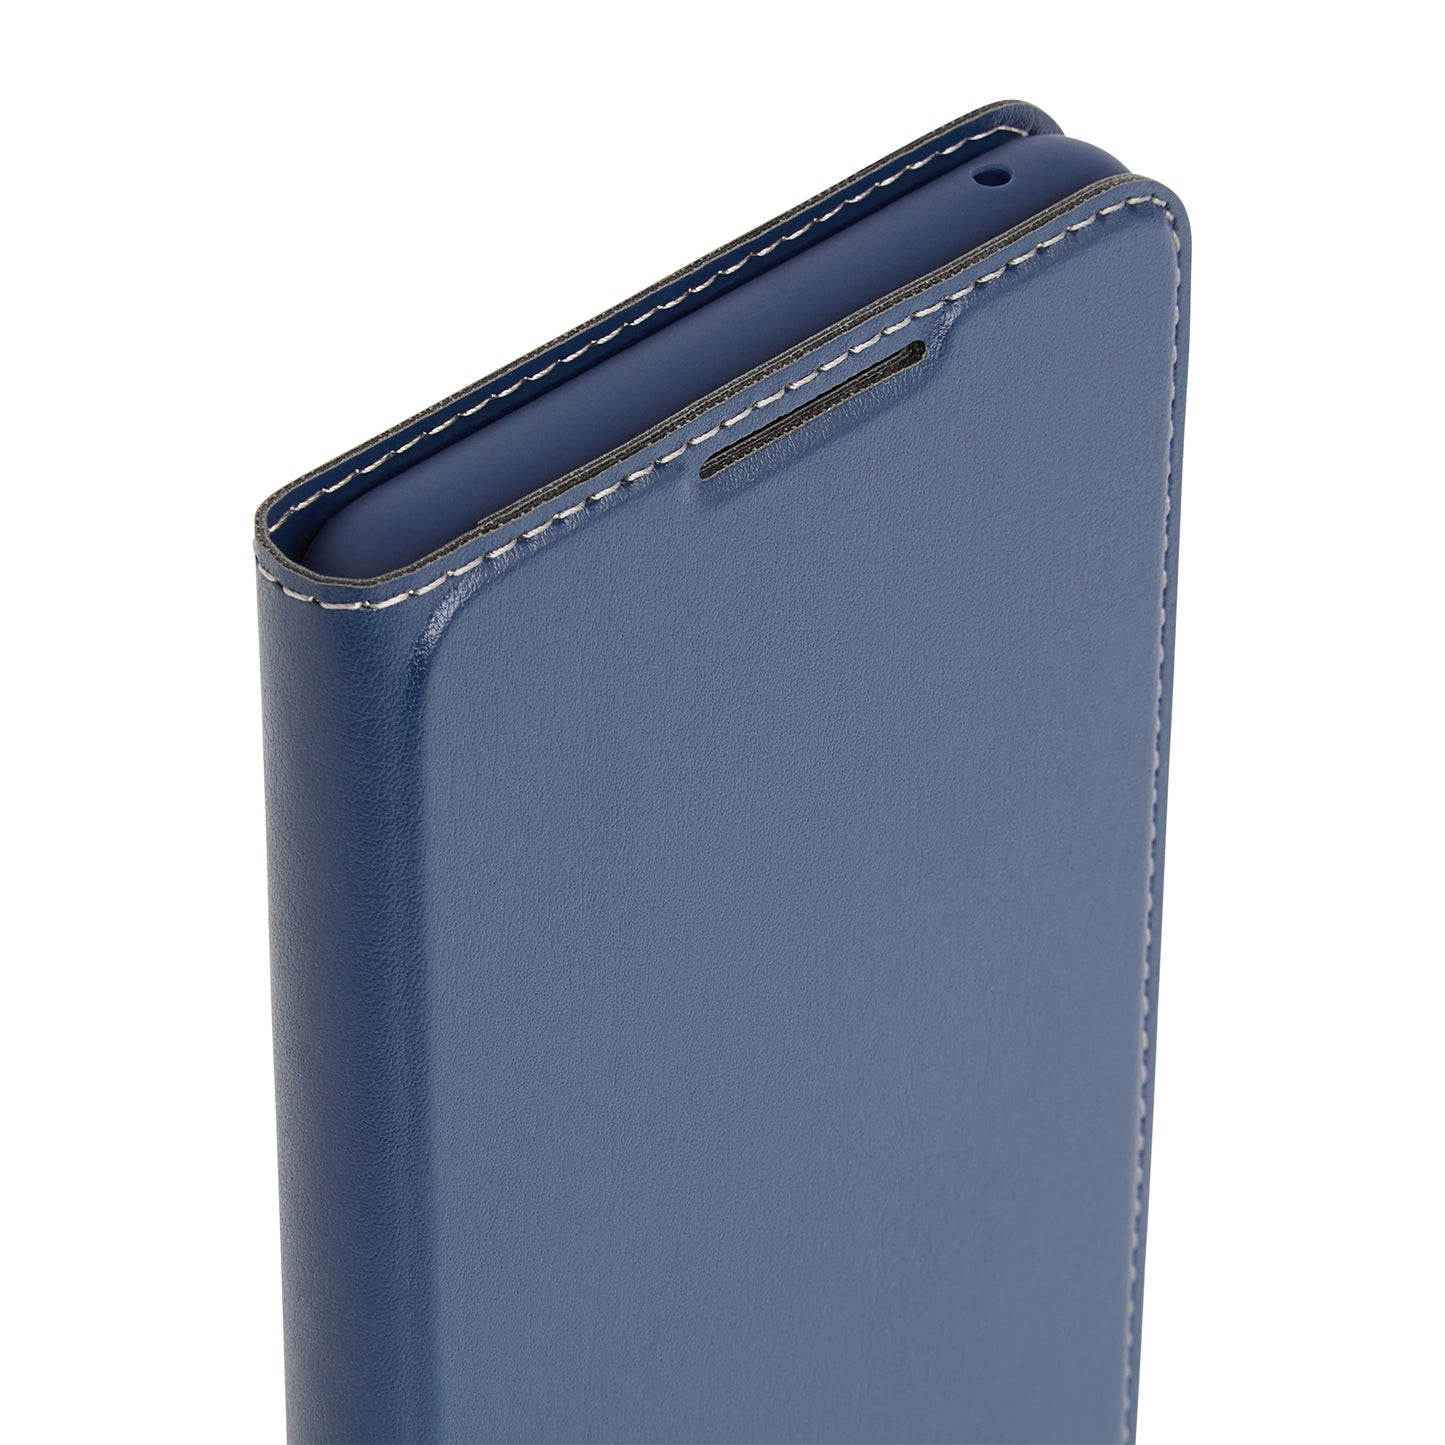 Wallet Cover - OPPO Find X2 Neo